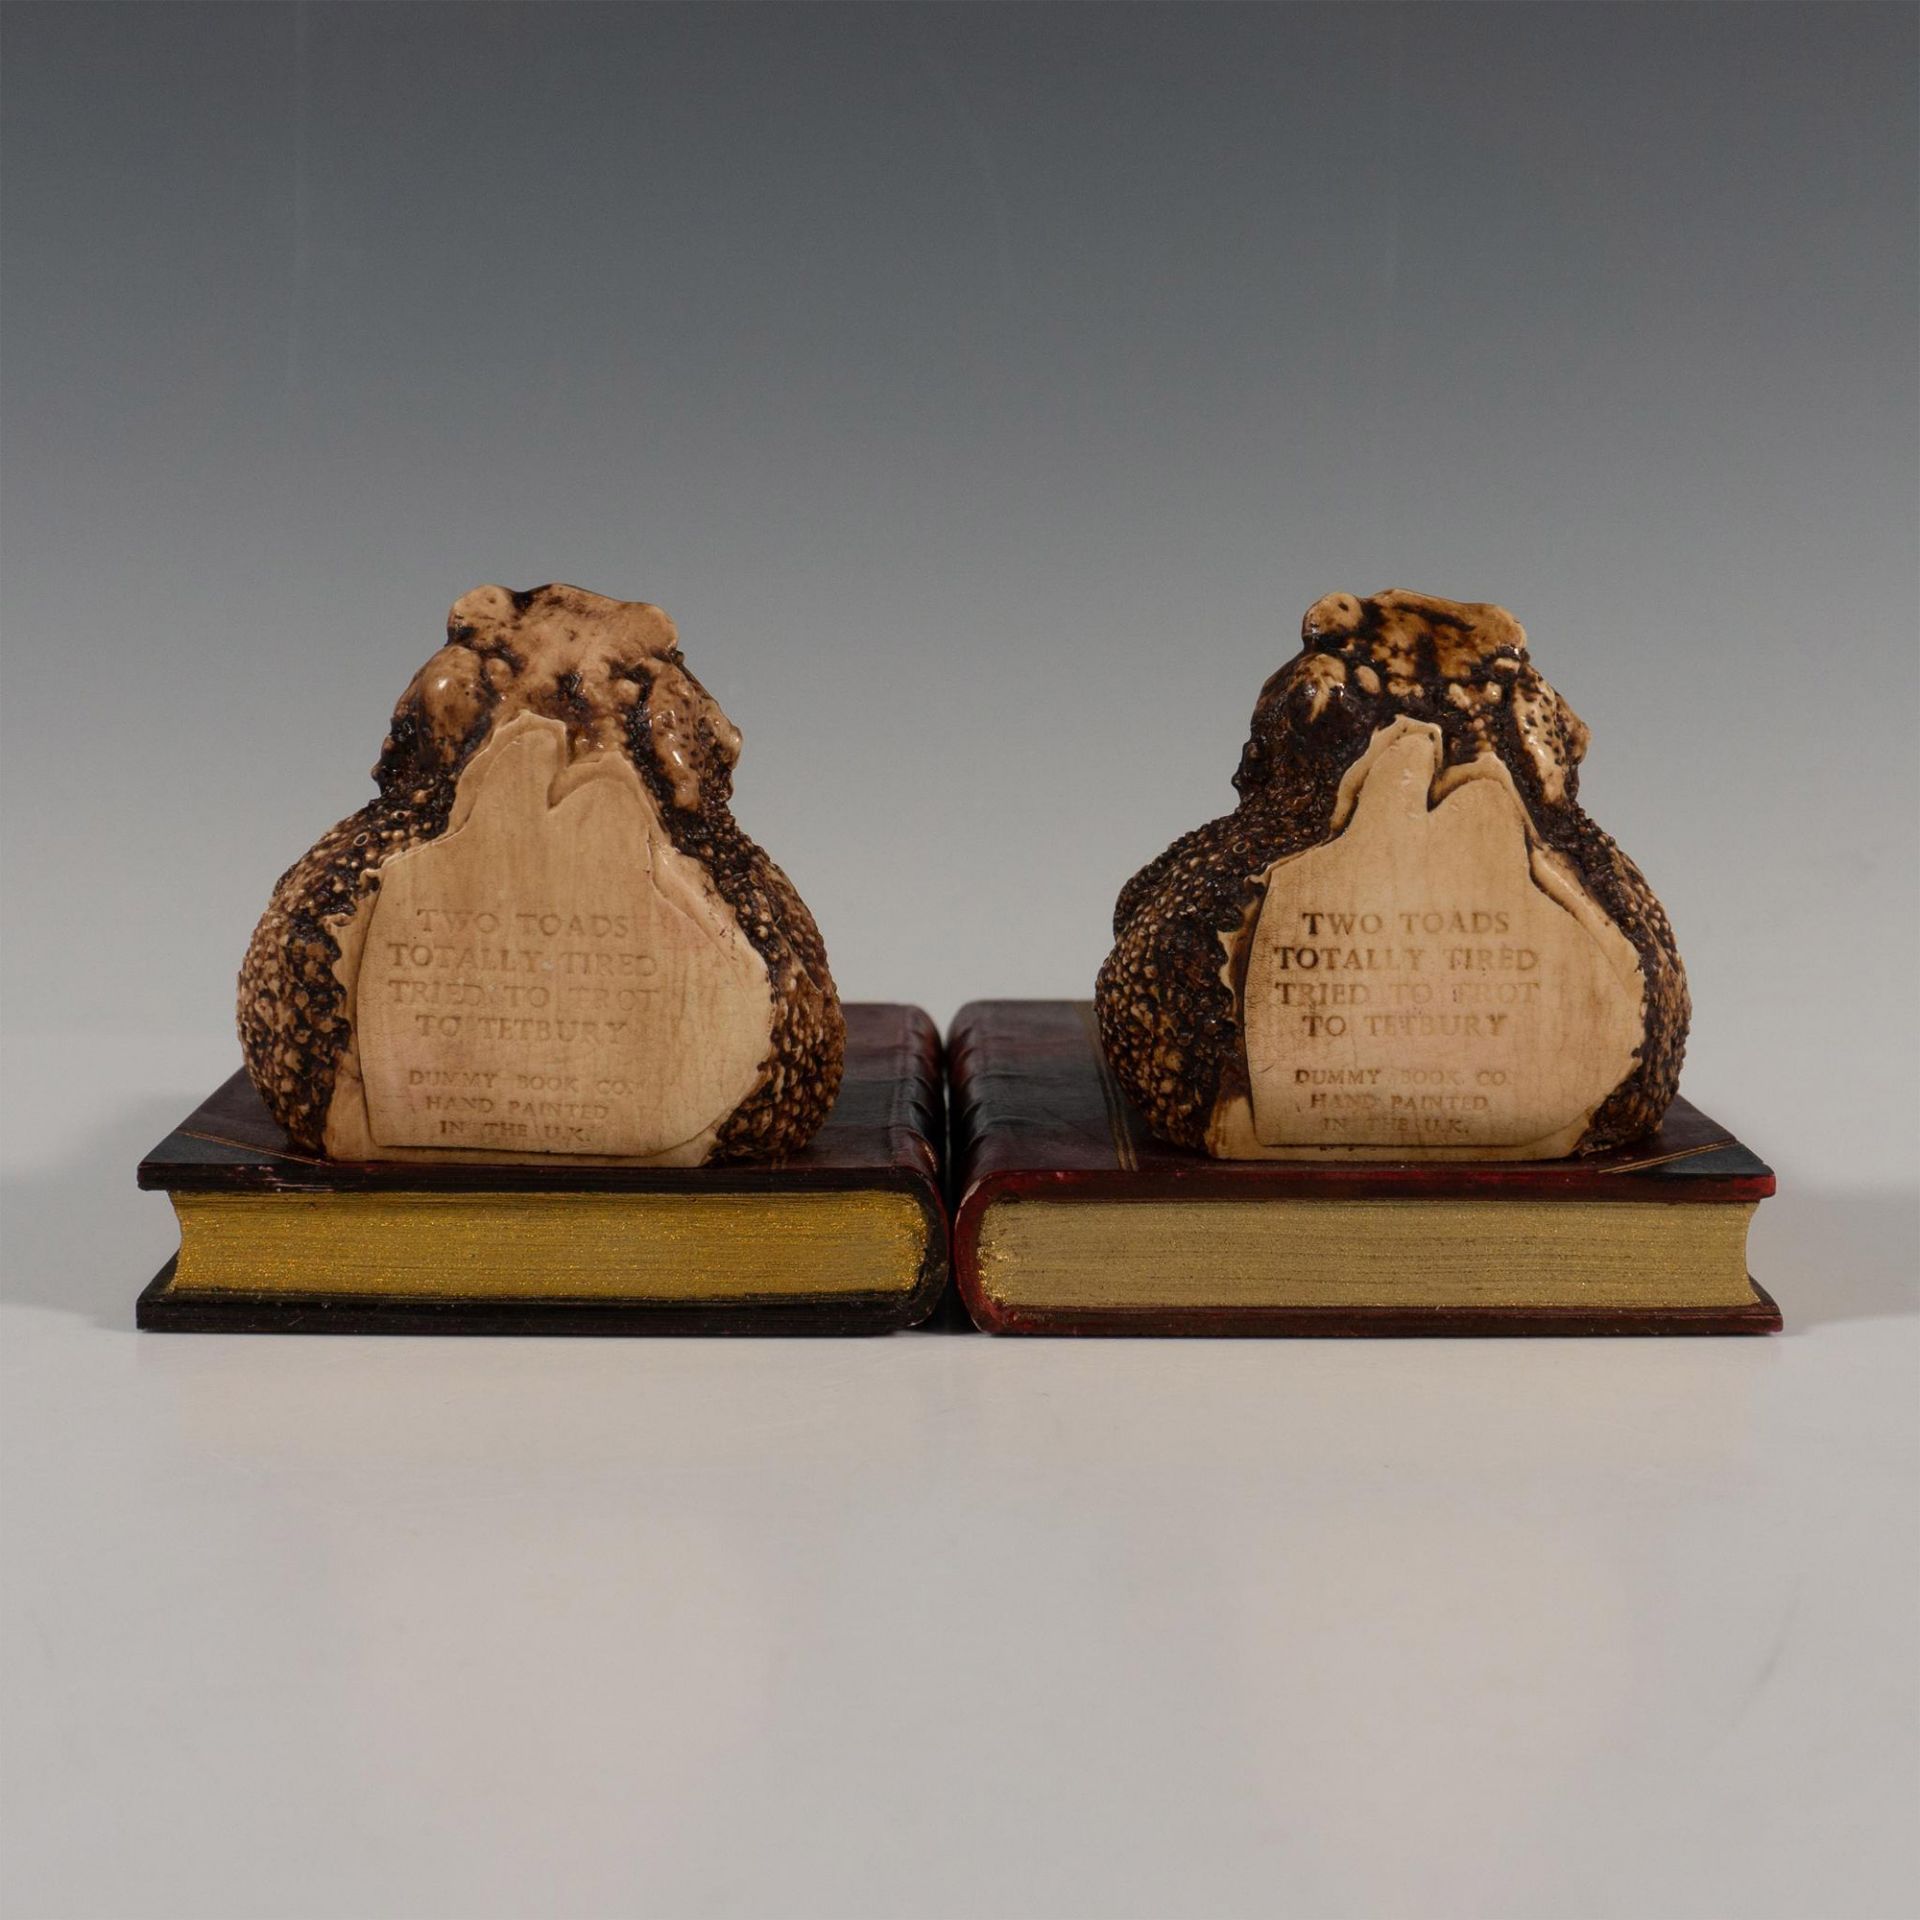 Pair of Original English Handmade Toad Bookends, London - Image 3 of 4